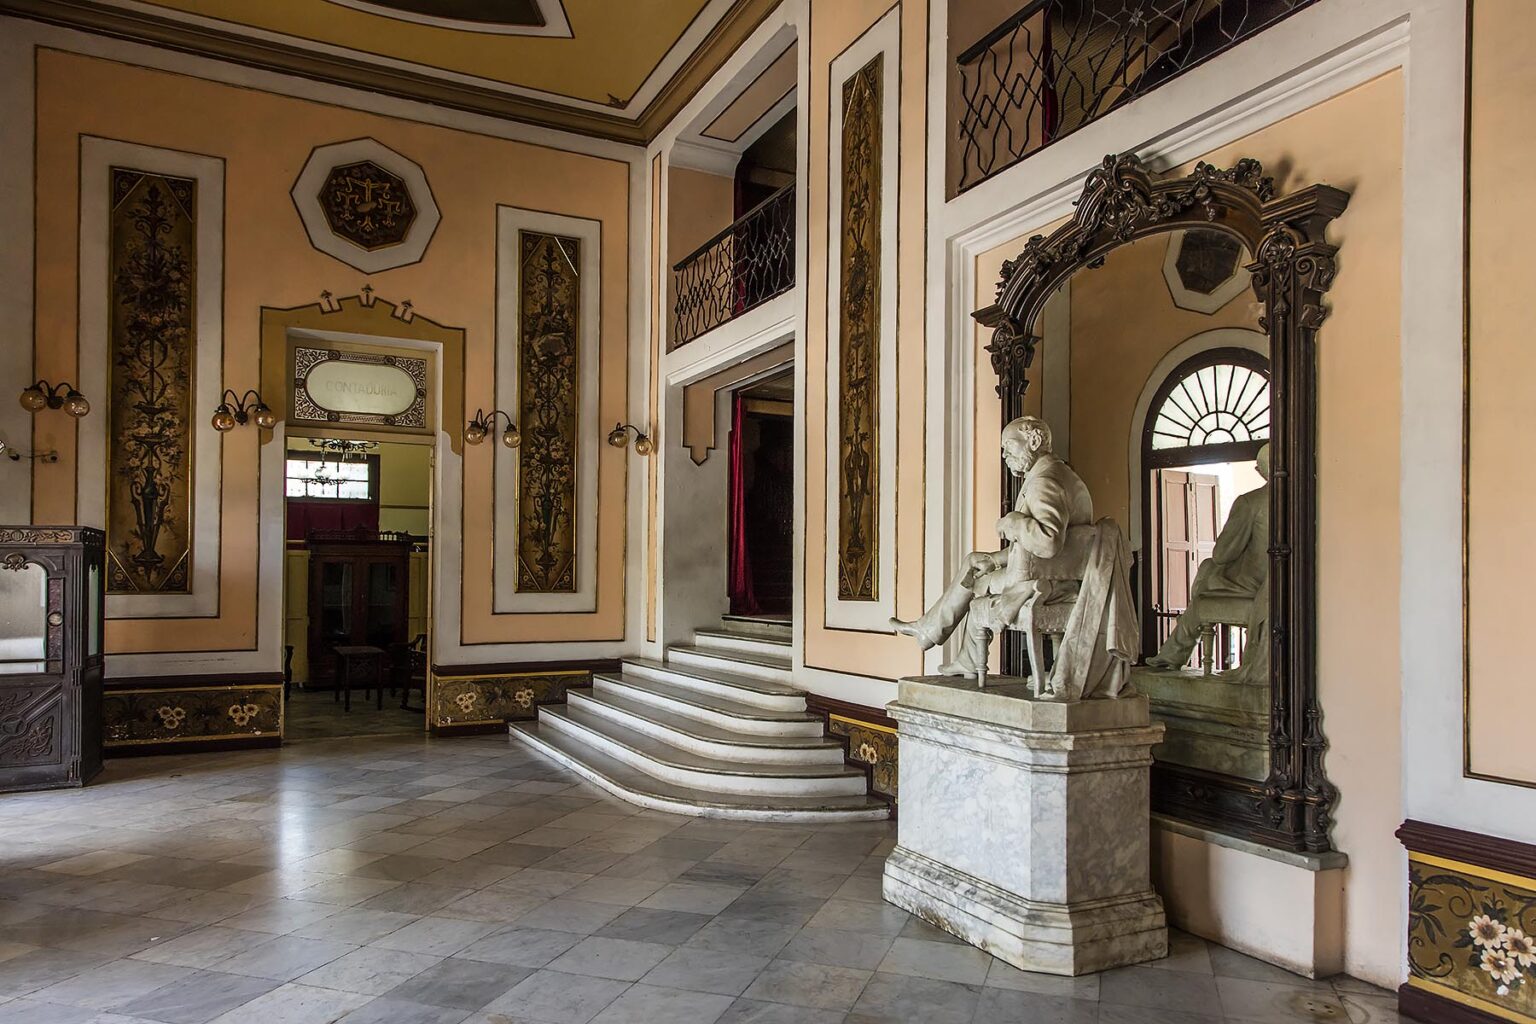 Front lobby of the TEATRO TOMAS TERRY built in 1887 and located on the PARQUE JOSE MARTI - CIENFUEGOS, CUBA